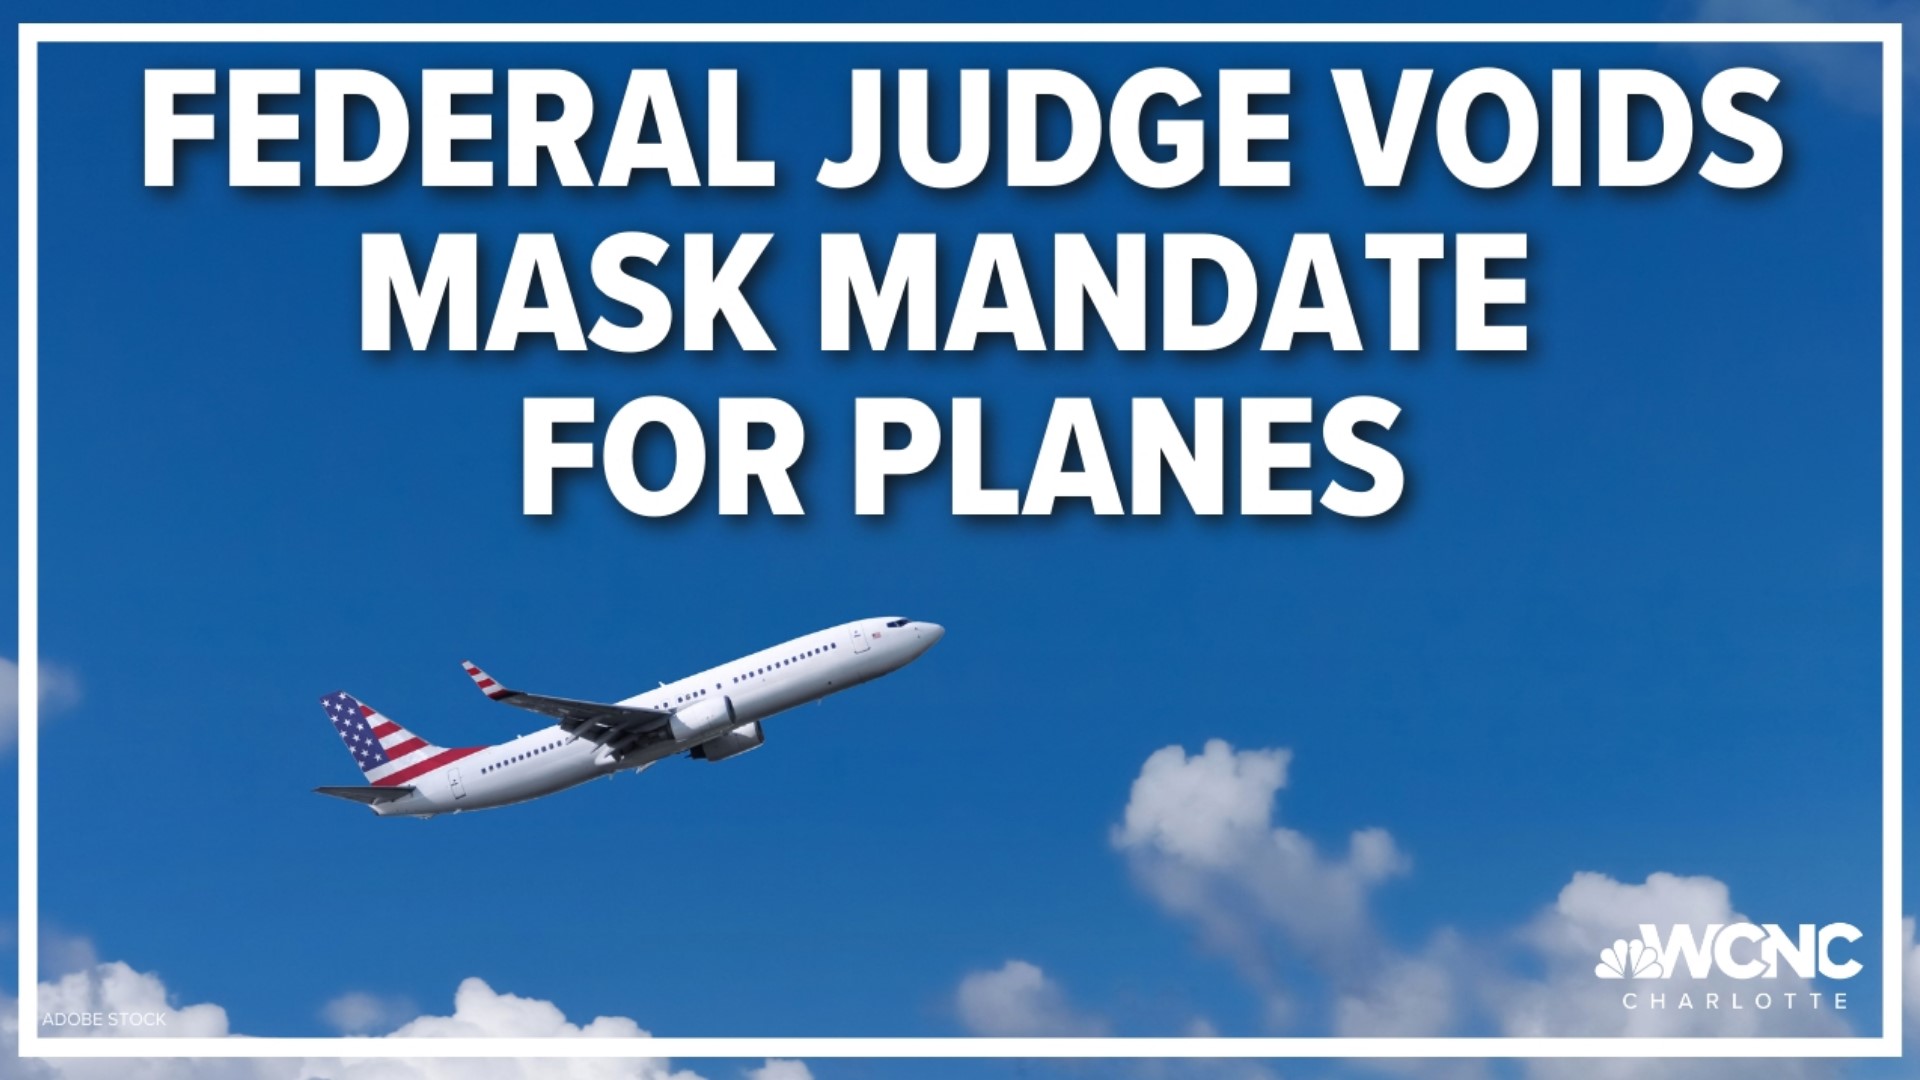 Major U.S. airlines like United, American and Delta airlines all lifted their mask policies for customers and employees Monday night.